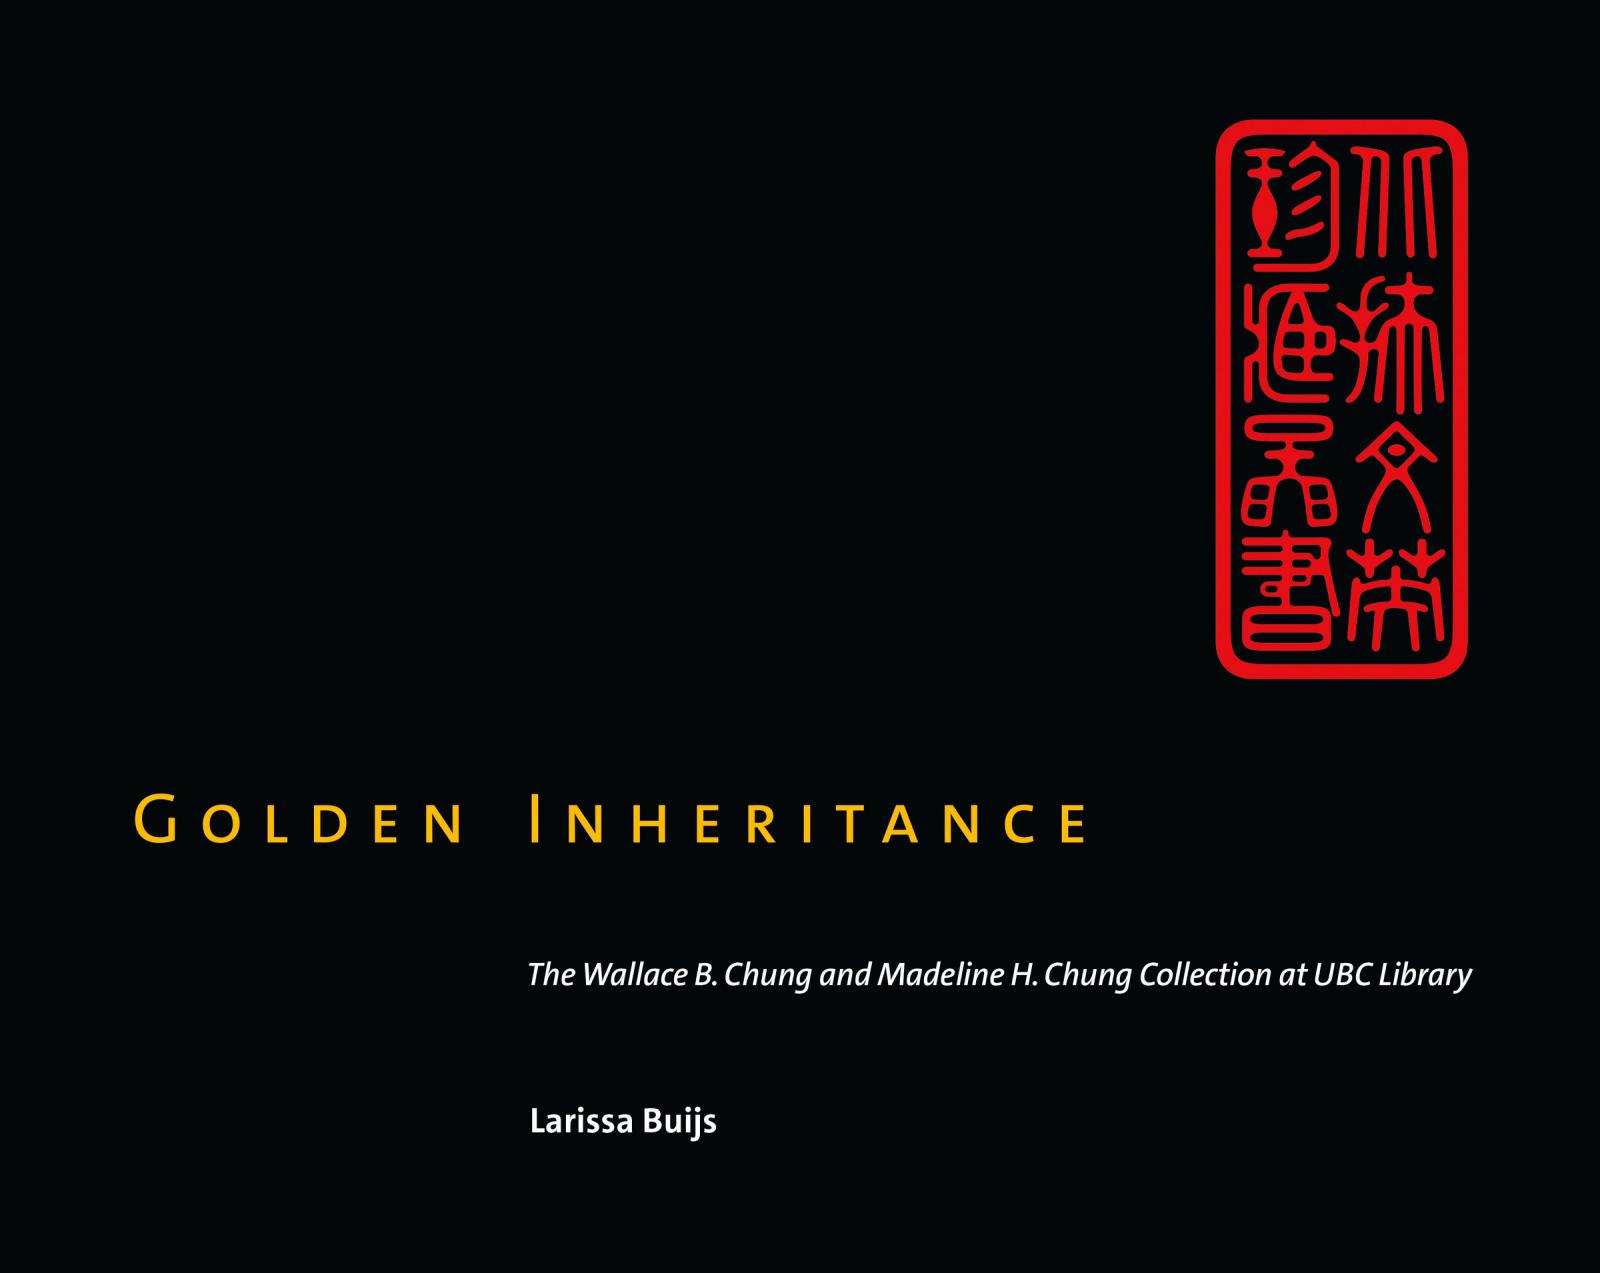 Book cover image for " Golden Inheritance : Wallace And Madeline Chung Collection"